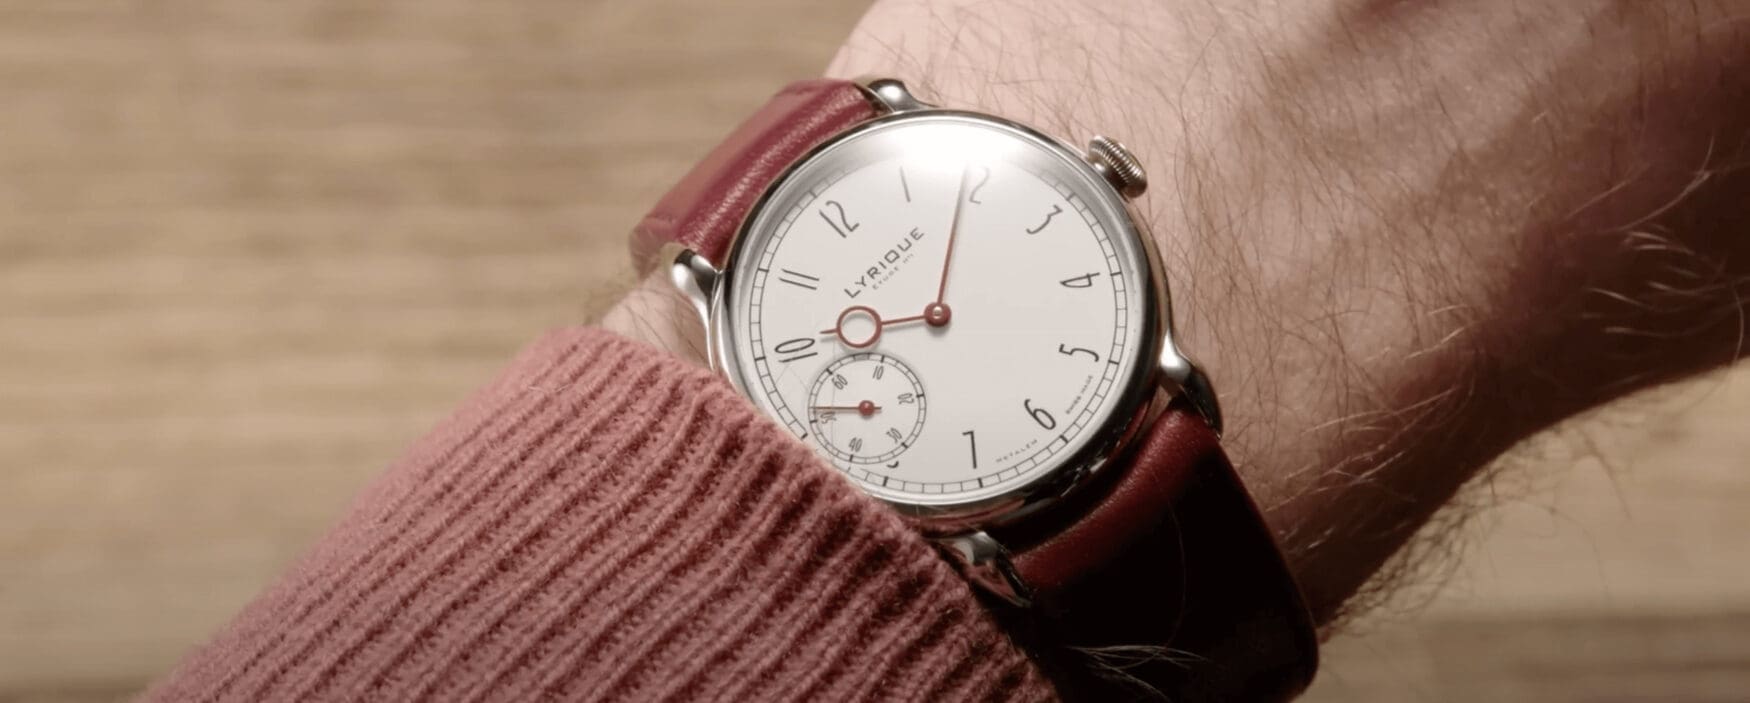 RECOMMENDED VIEWING: Watchfinder & Co’s Andrew Morgan tells the story of the collector-made Lyrique watch